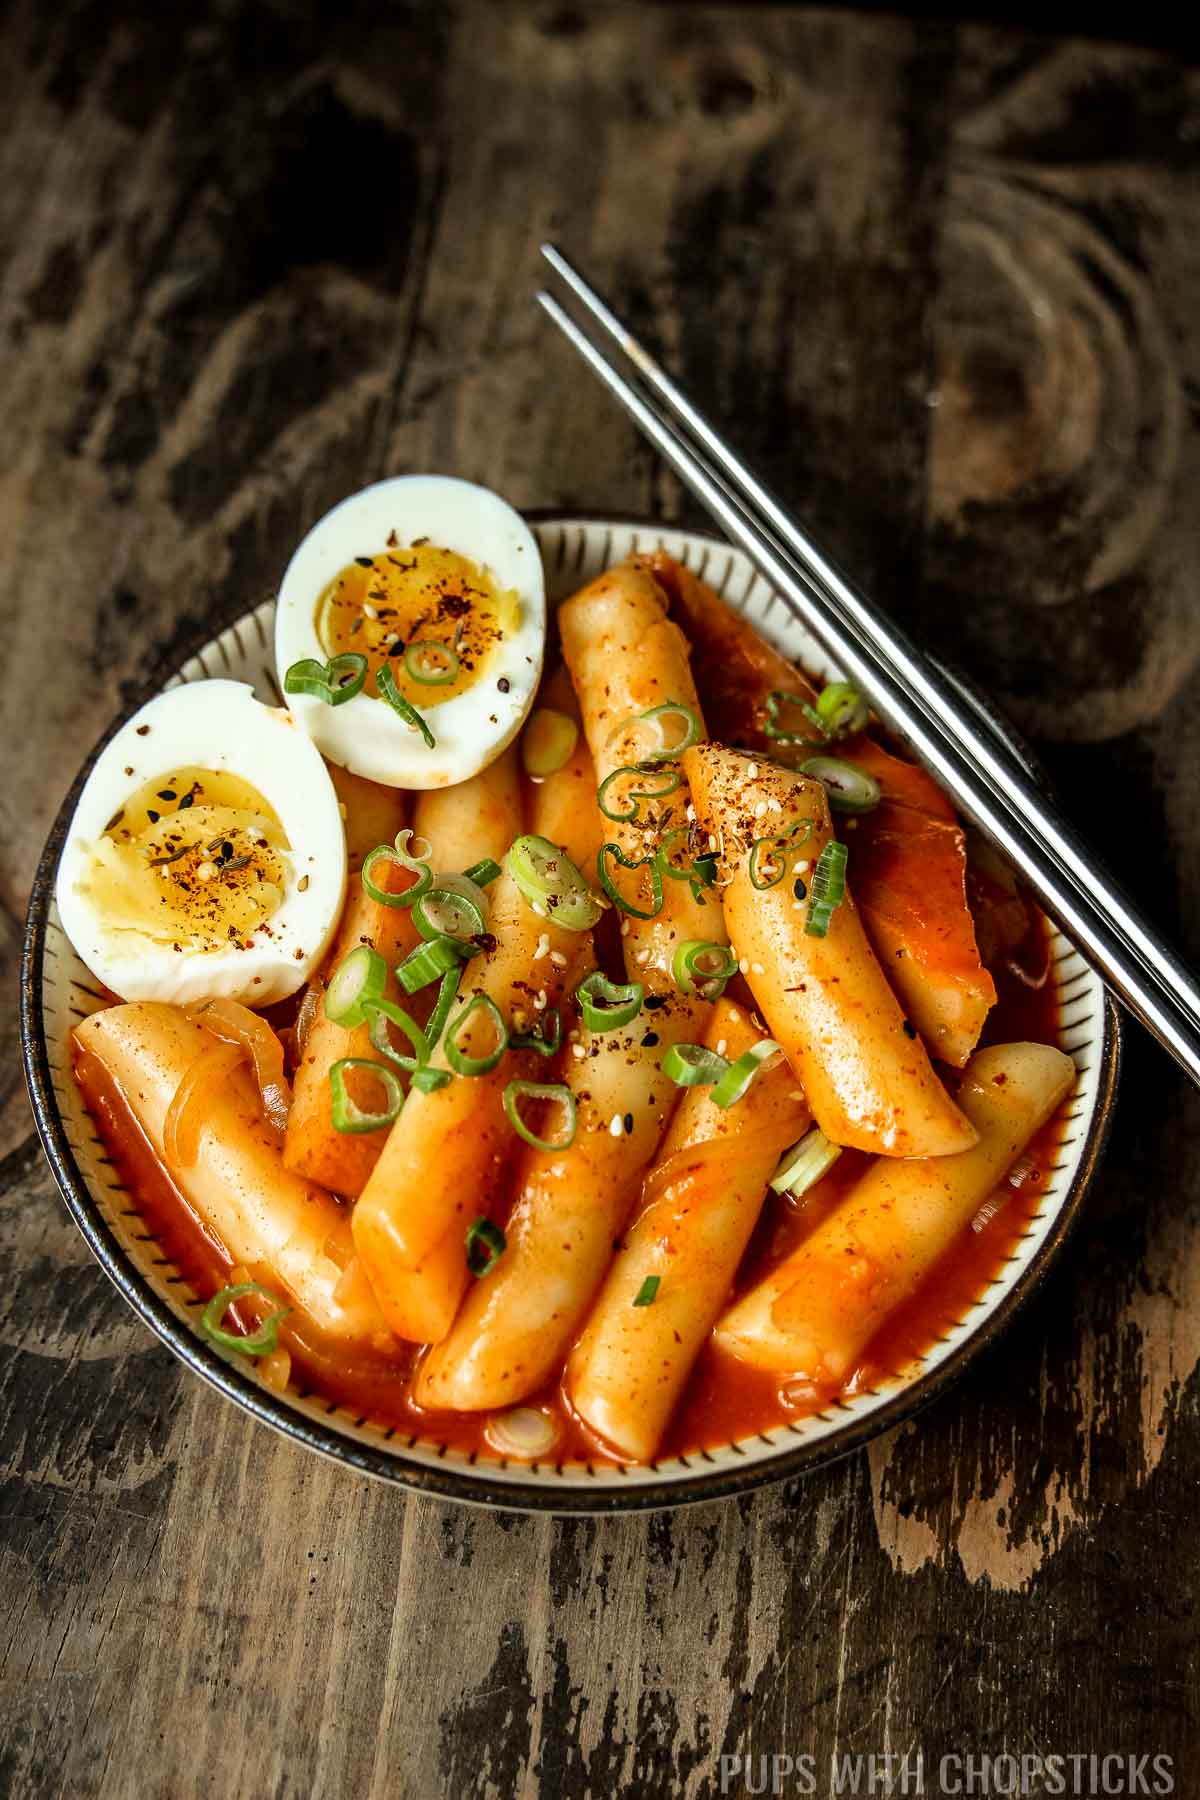 A small bowl of tteokbokki (Spicy korean rice cakes) with medium boiled eggs sliced in half and garnished with green onions, with a pair of metal chopsticks